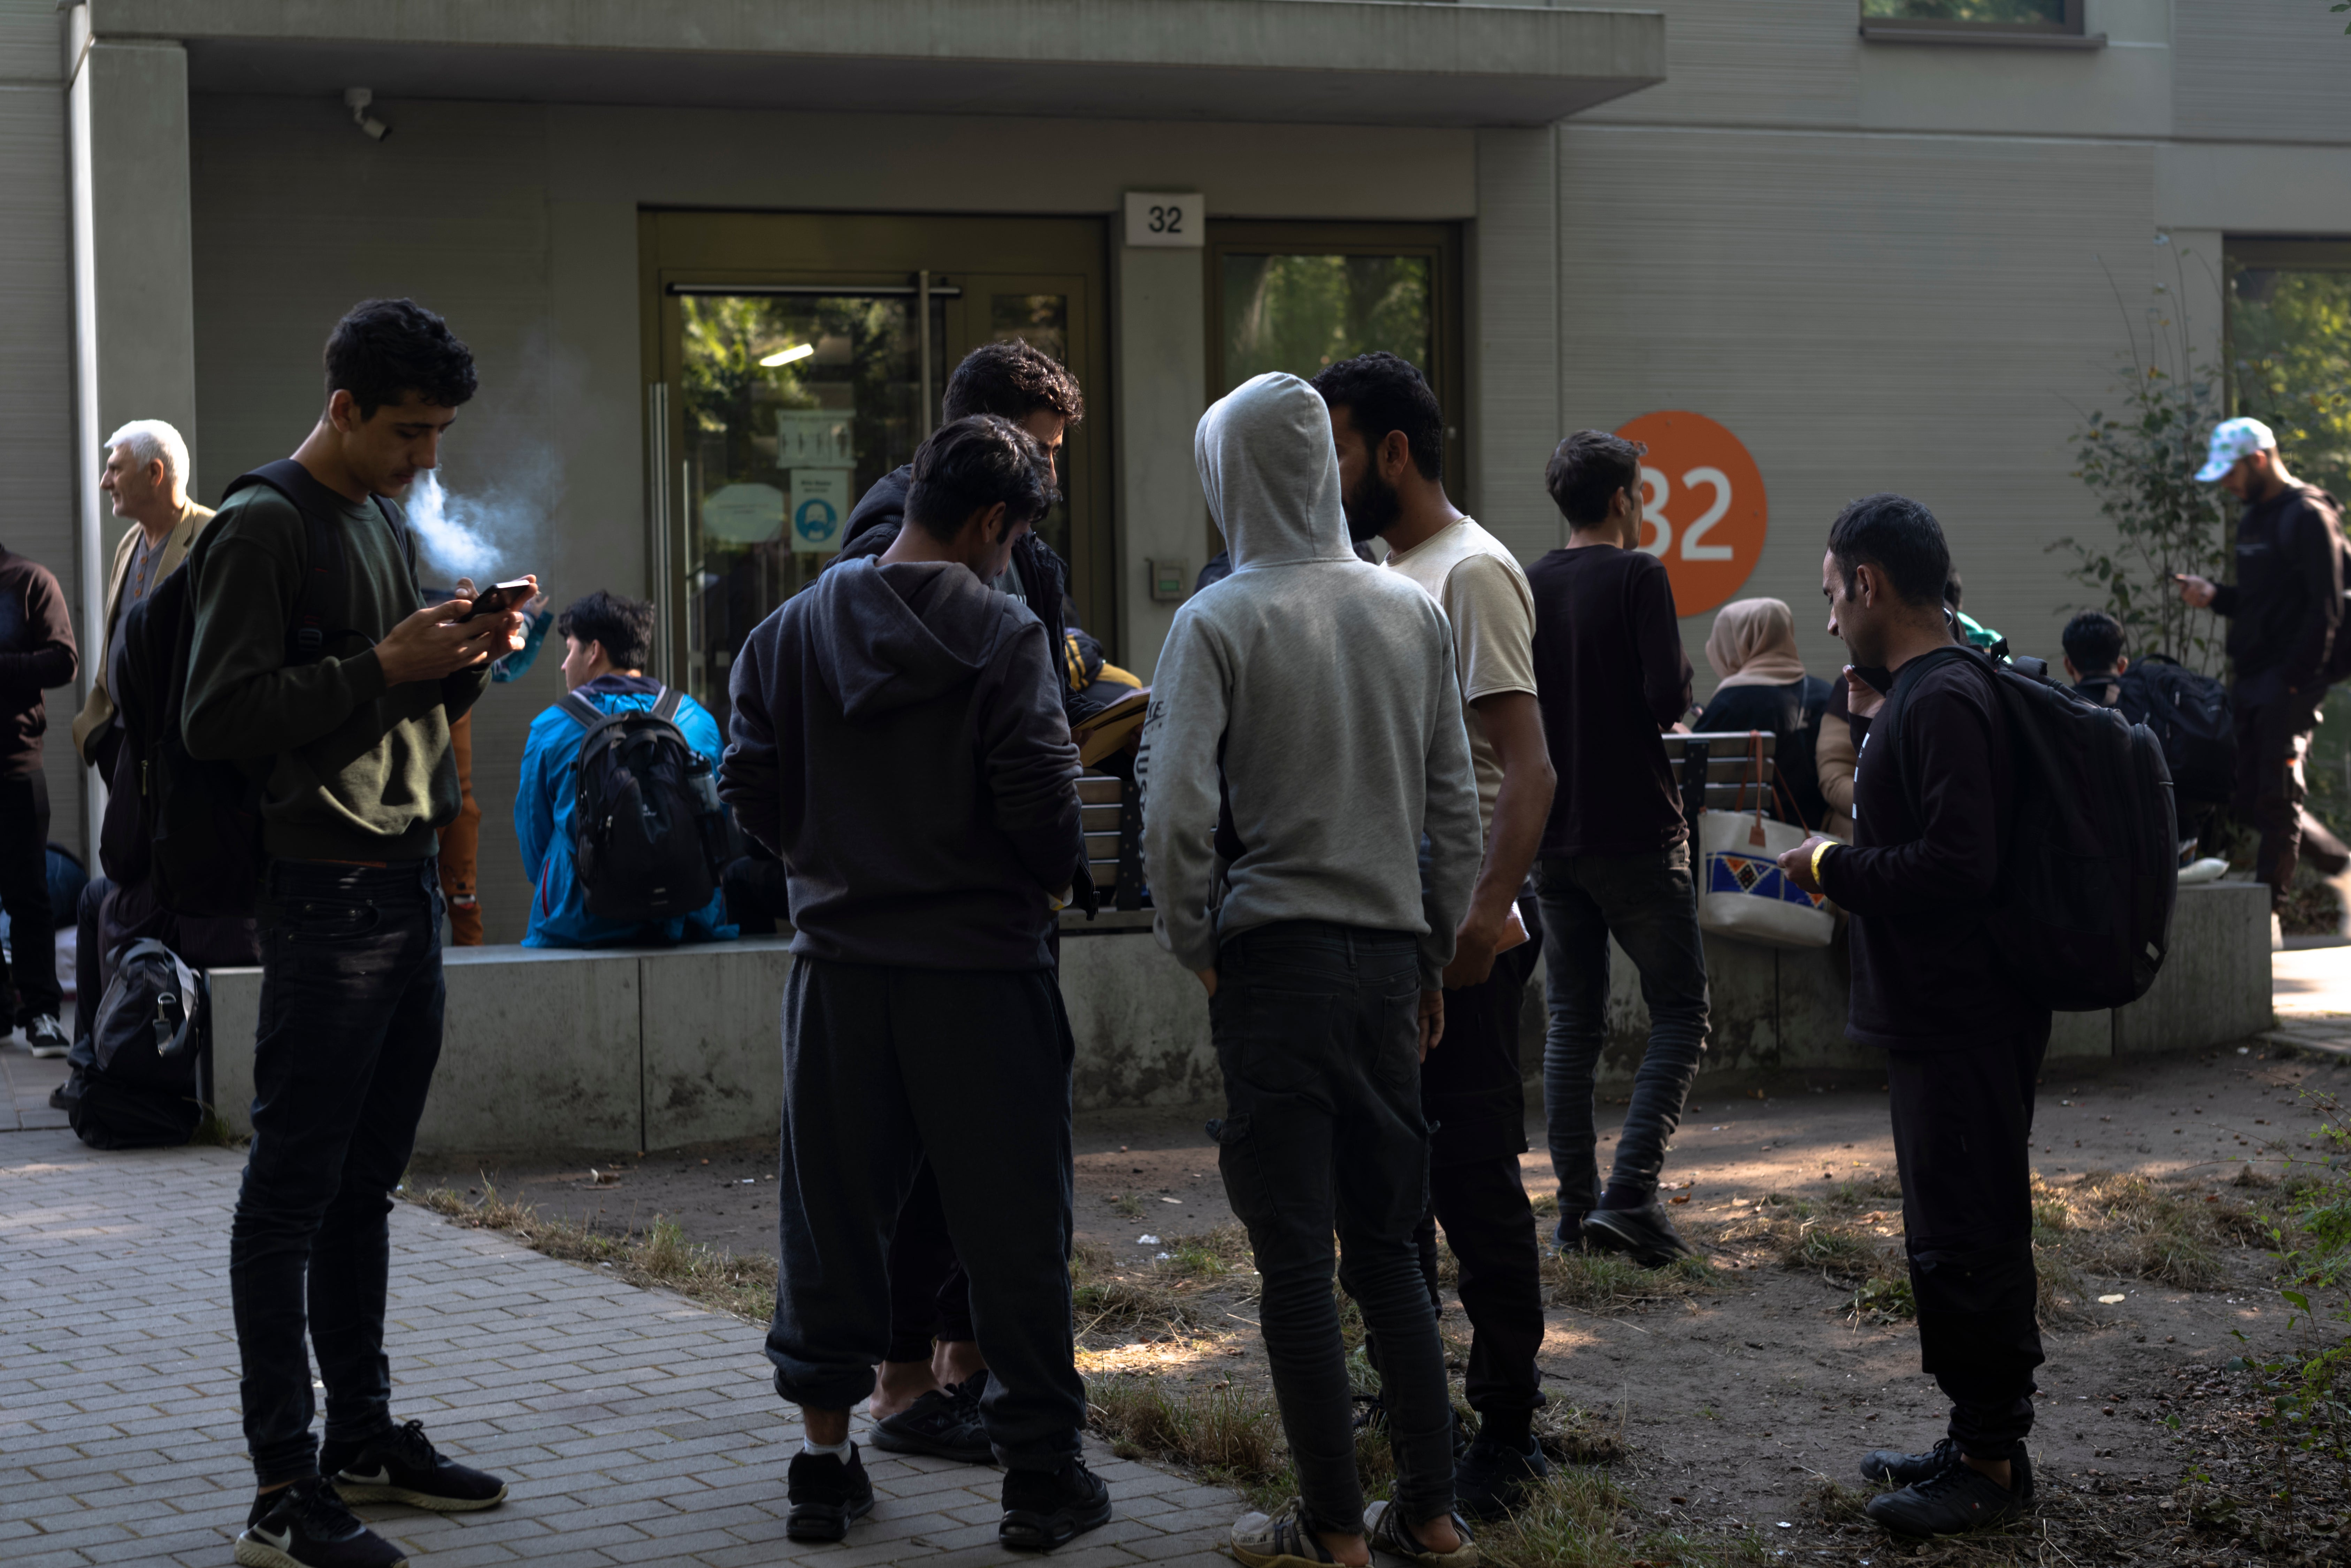 Dozens of people from all over the world line in front of the central registration center for asylum seekers in Berlin